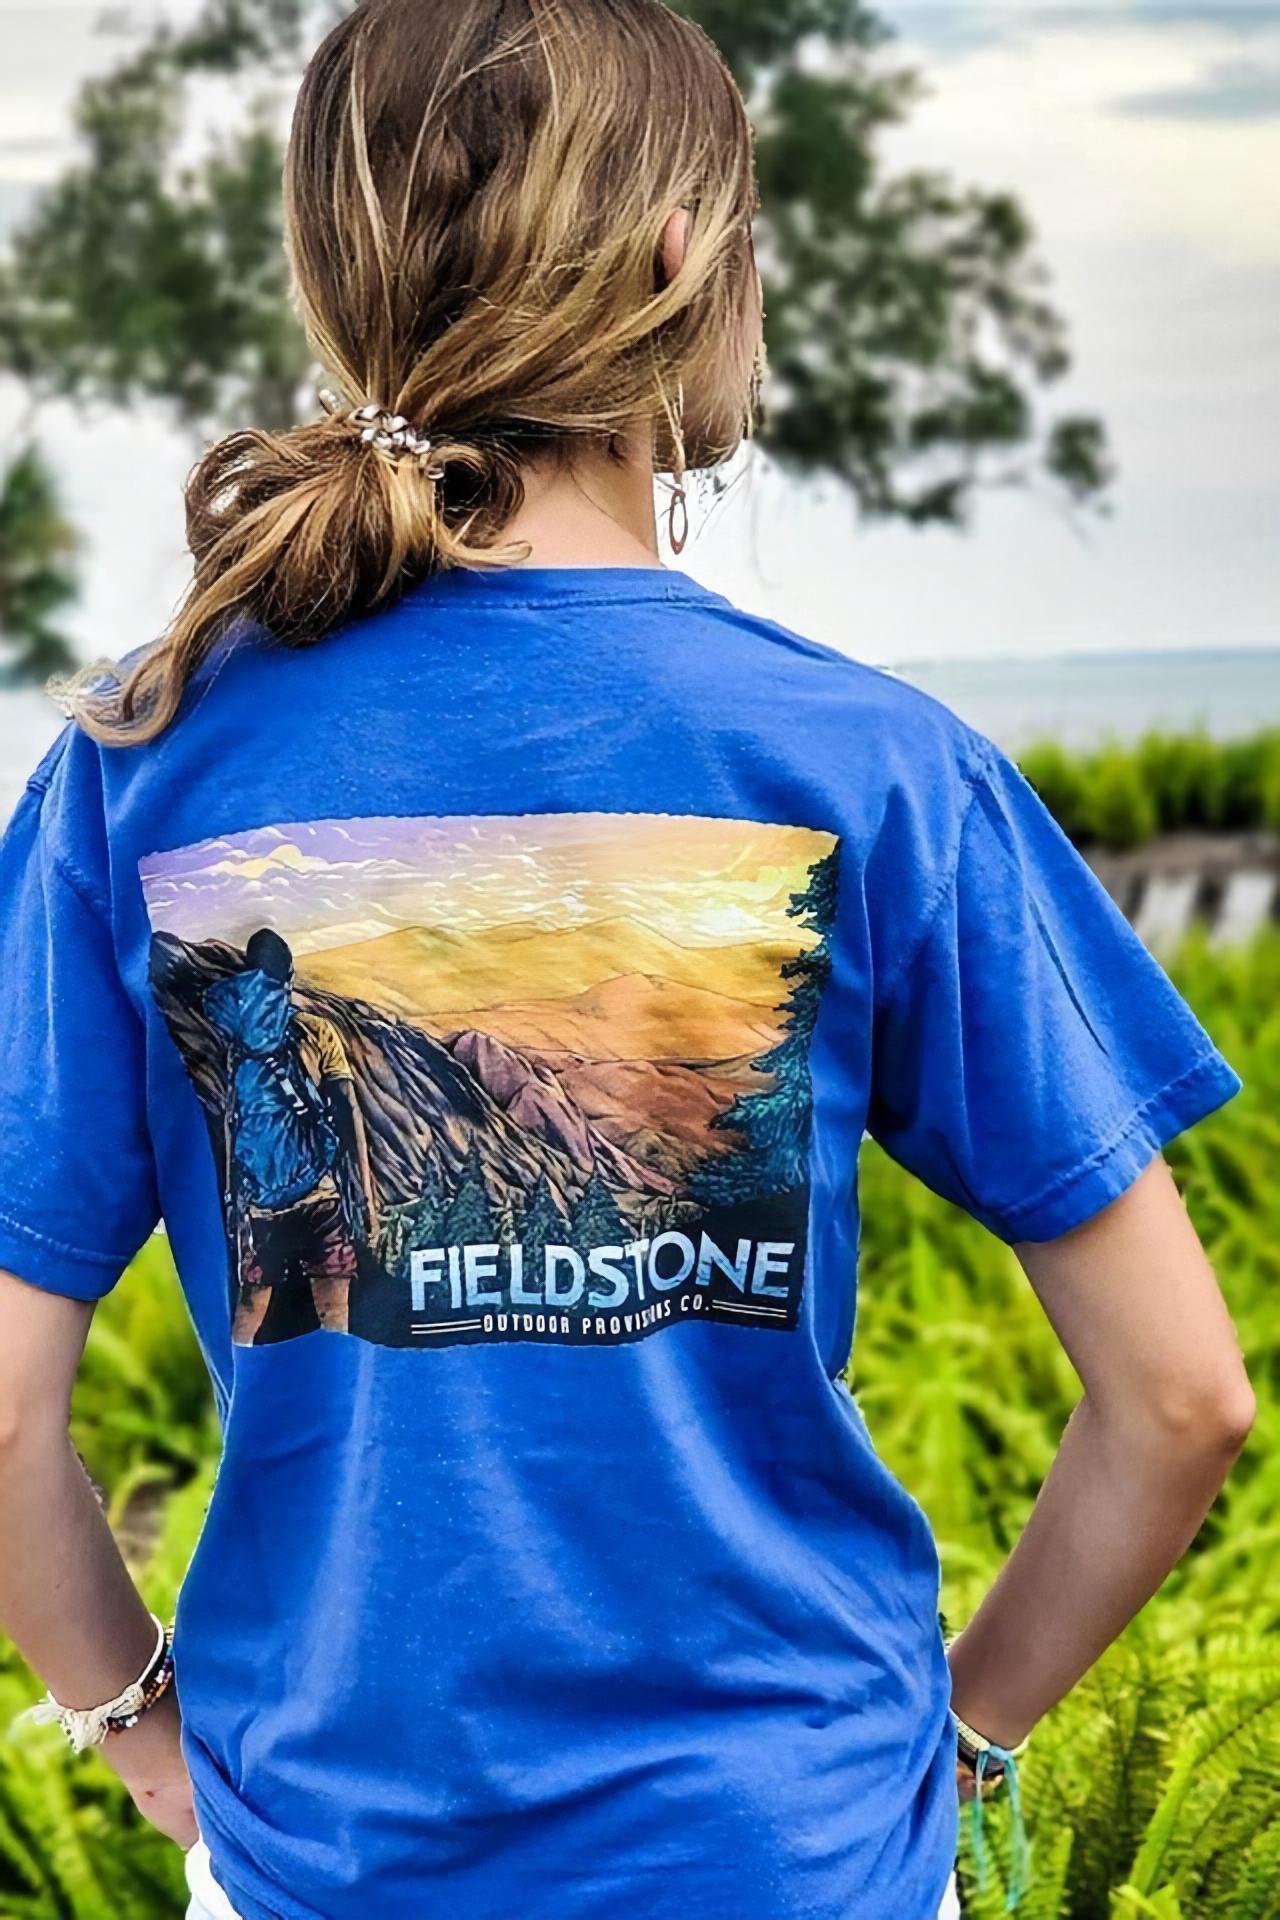 Mountain Top Short Sleeve T-Shirt by Fieldstone Outdoors